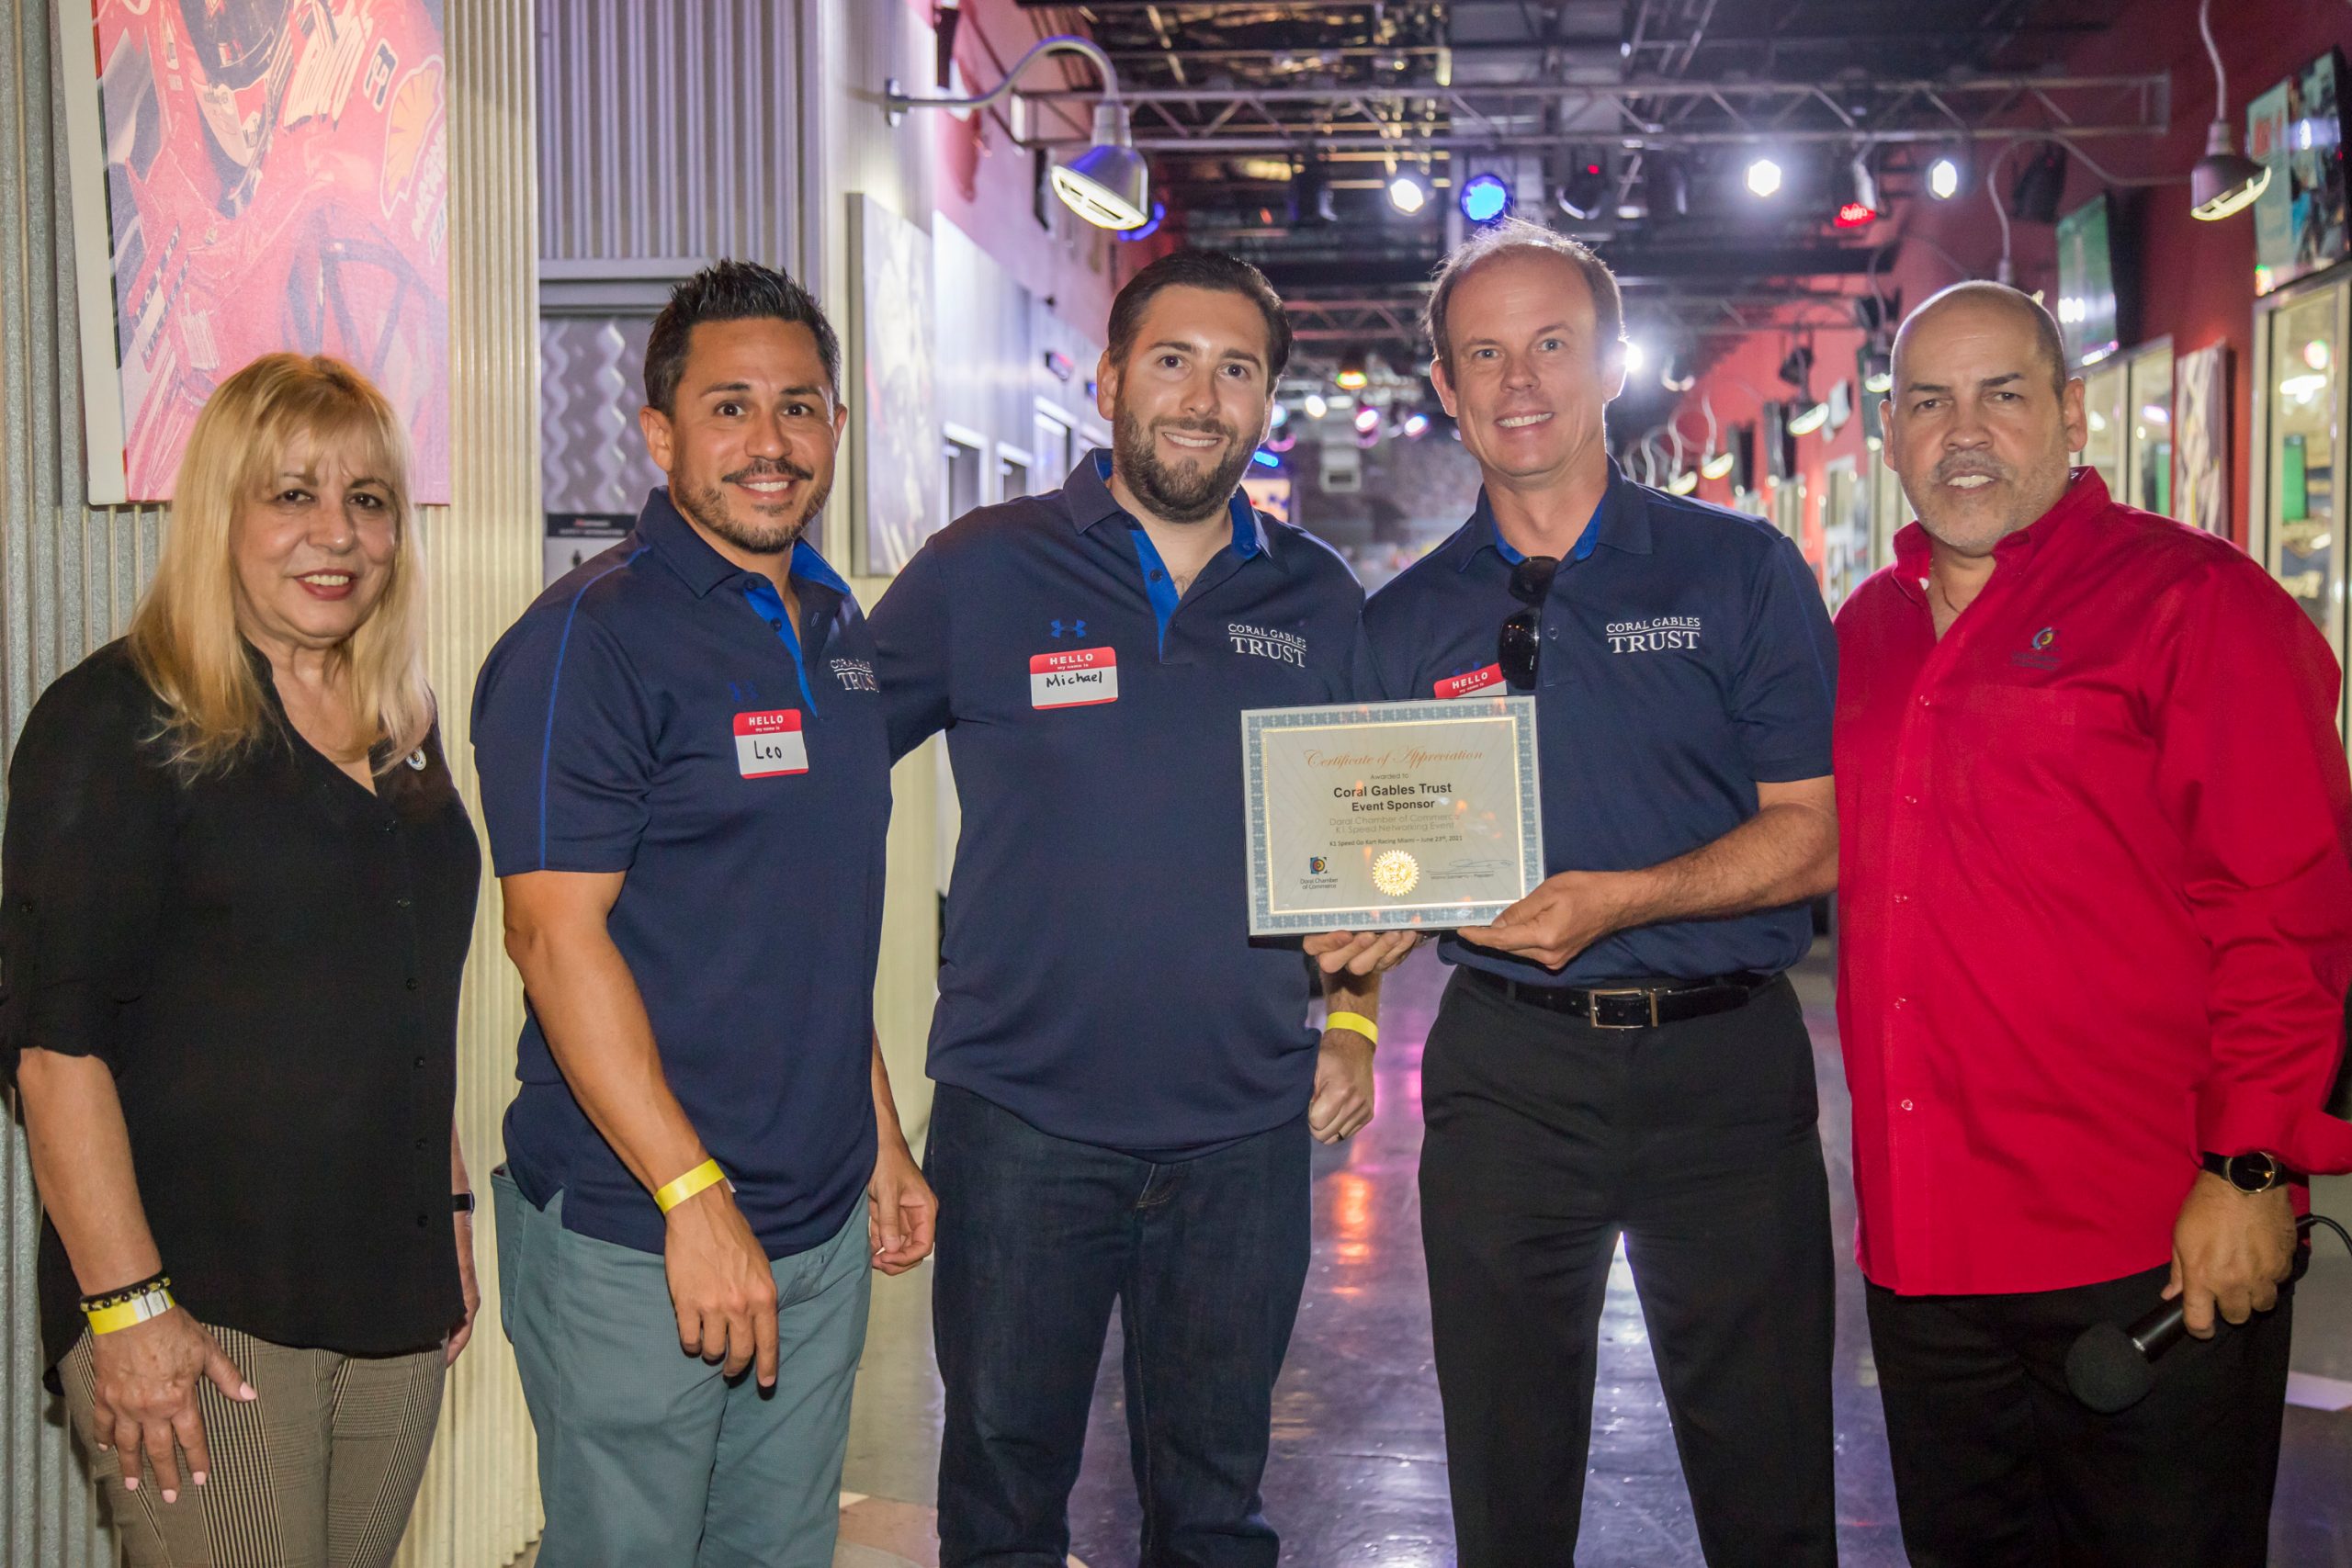 Doral Chamber of Commerce Networking Event at K1 Speed Medley - Miami with Coral Gables Trust. A DCC Trustee Member!